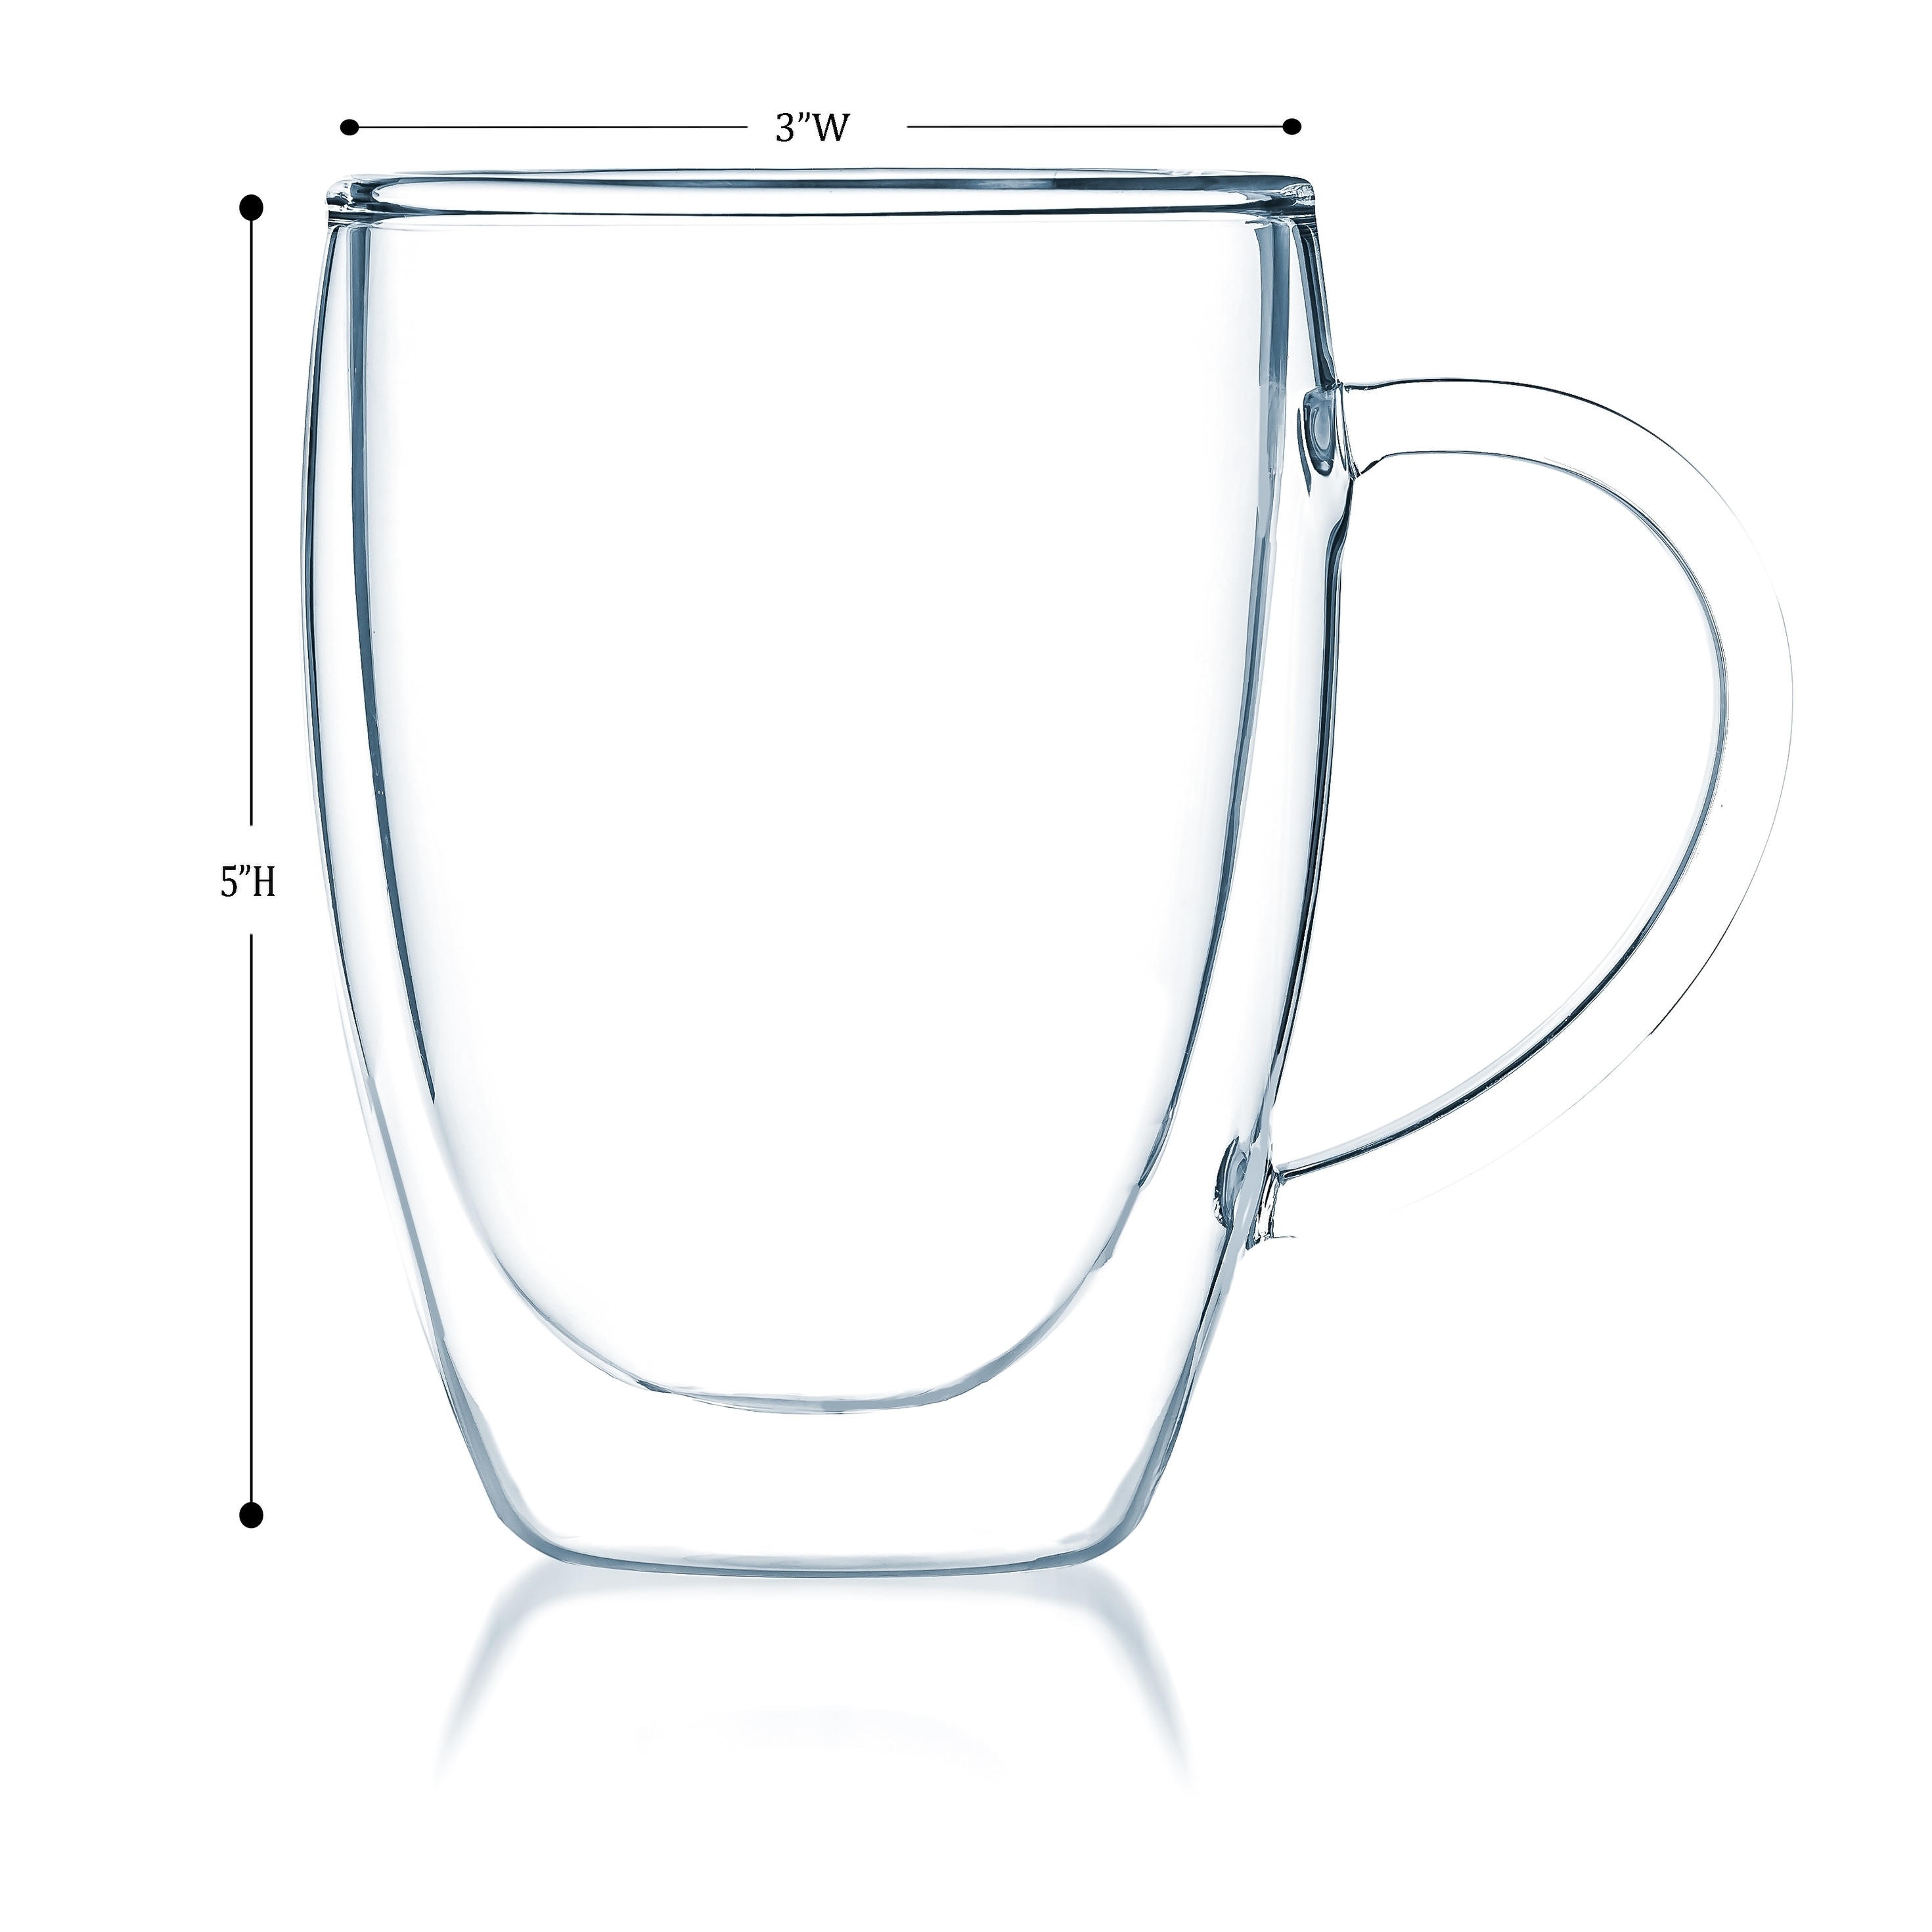 https://ak1.ostkcdn.com/images/products/14427905/JavaFly-Clear-Glass-12-ounce-Double-walled-Thermo-Bistro-Mug-with-Handle-Set-of-2-9363b295-7f9a-4050-a56e-58142501aec7.jpg